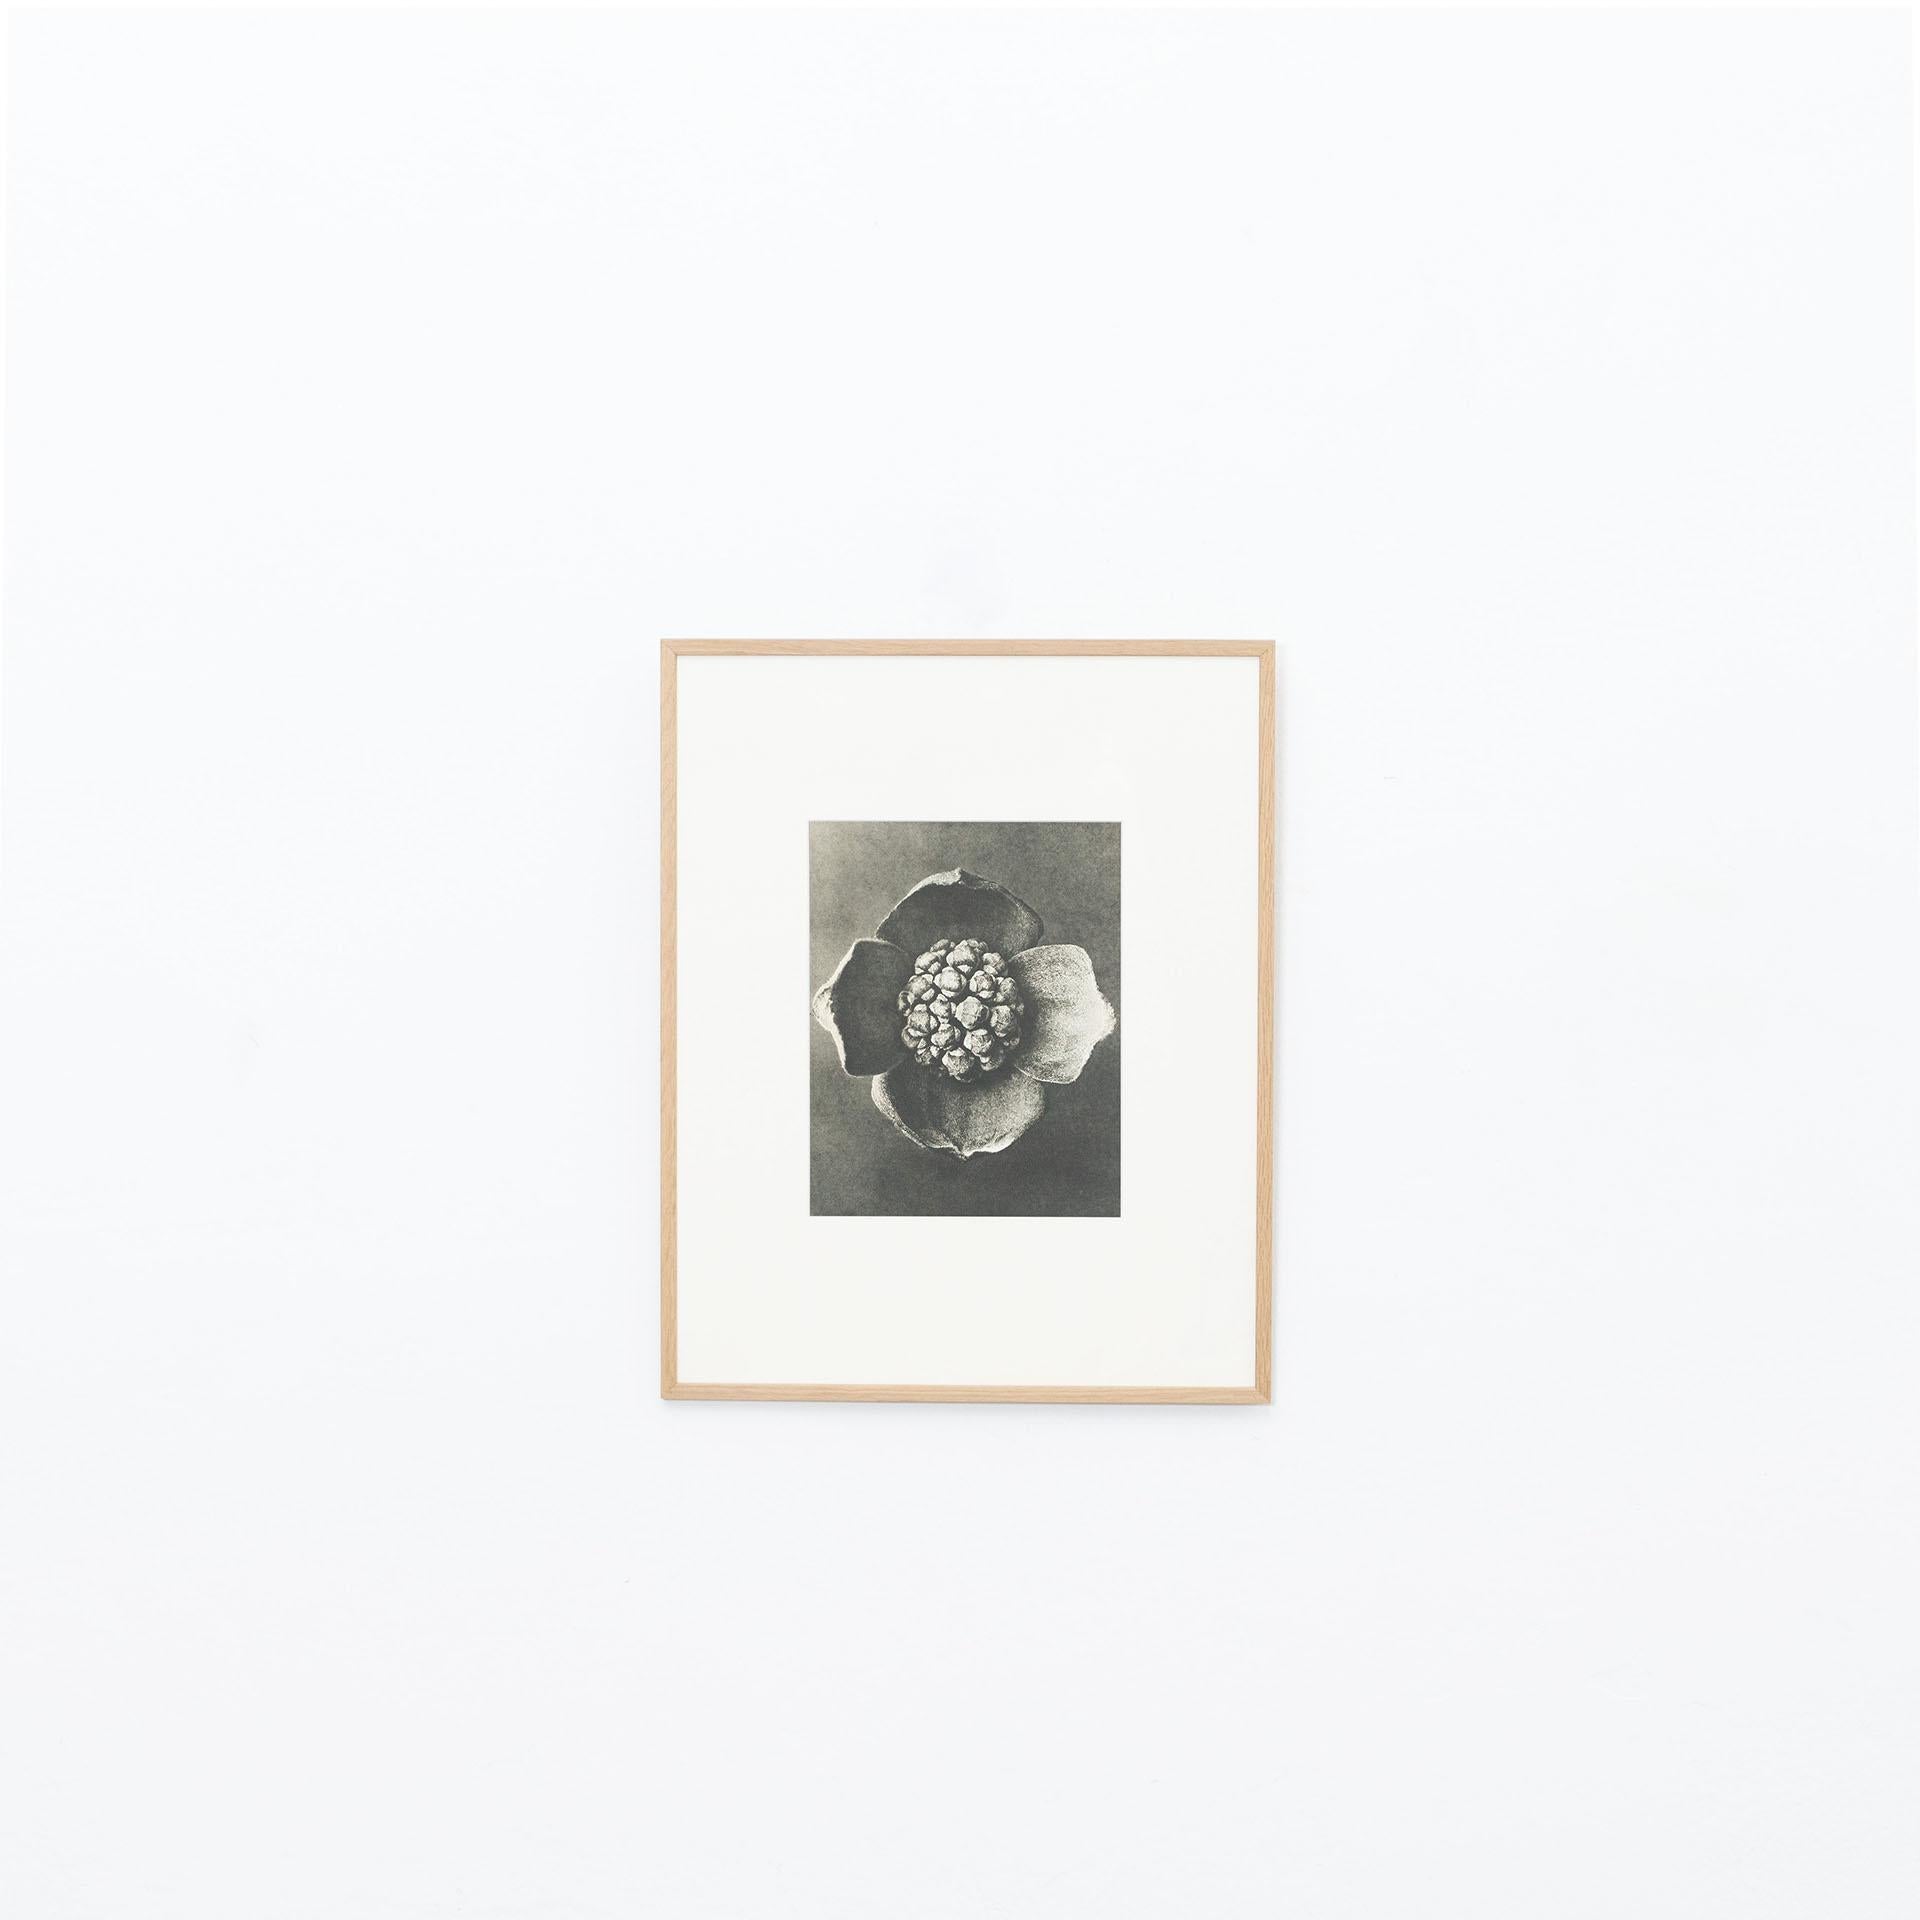 Karl Blossfeldt Photogravure from the edition of the book 'Wunder in der Natur' in 1942.

Photography number 42. 

In original condition, with minor wear consistent with age and use, preserving a beautiful patina.

Karl Blossfeldt (June 13,